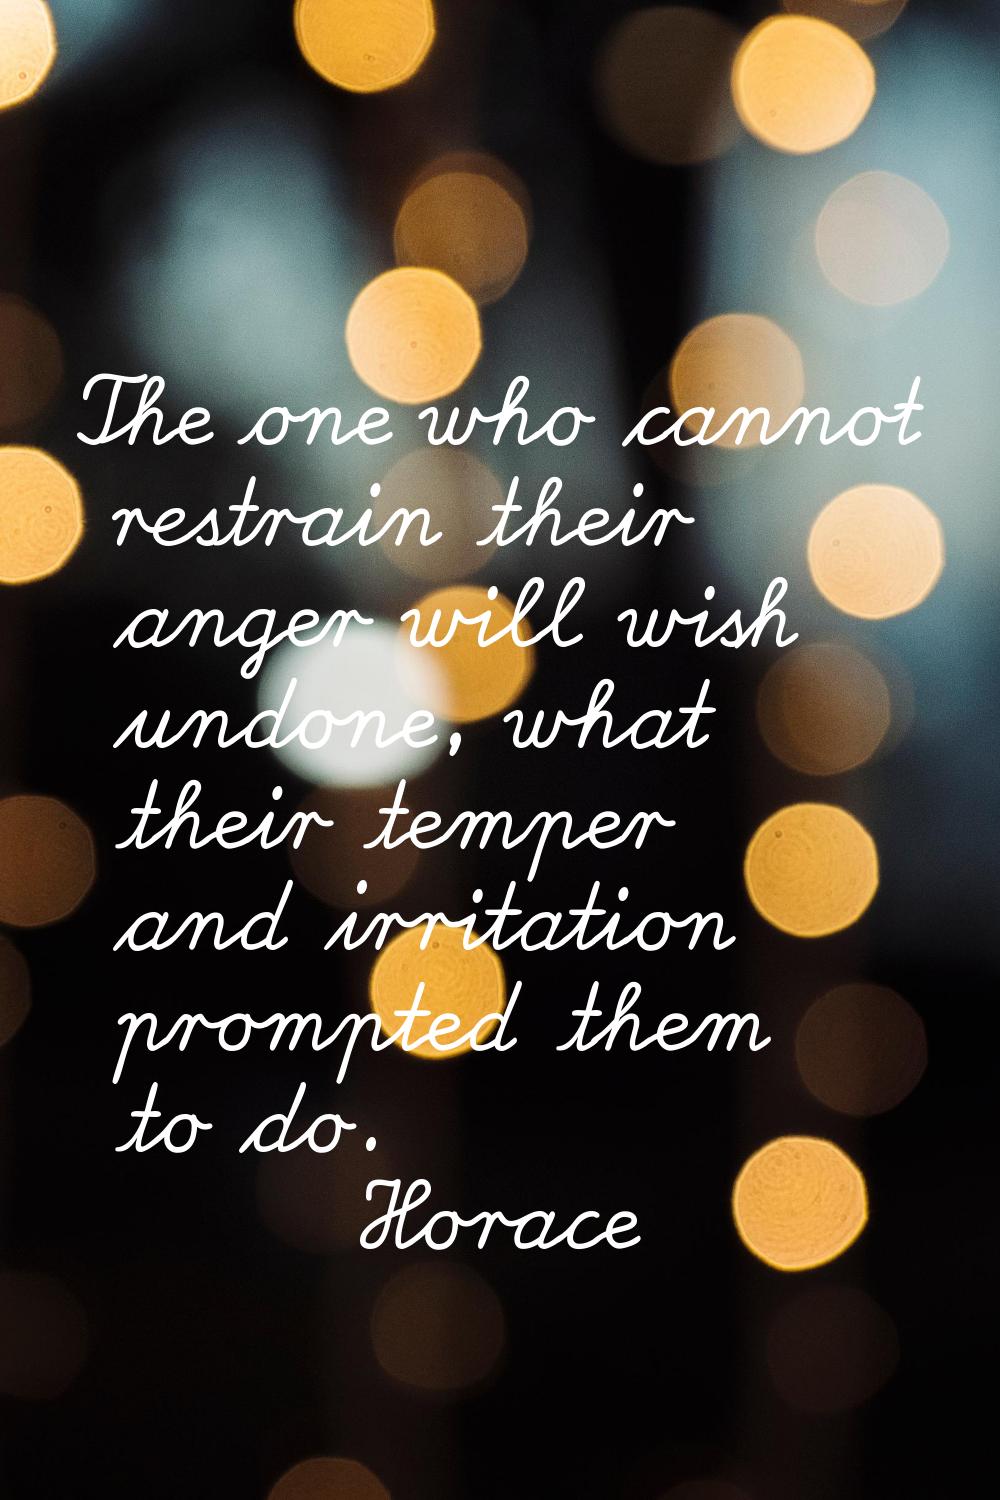 The one who cannot restrain their anger will wish undone, what their temper and irritation prompted